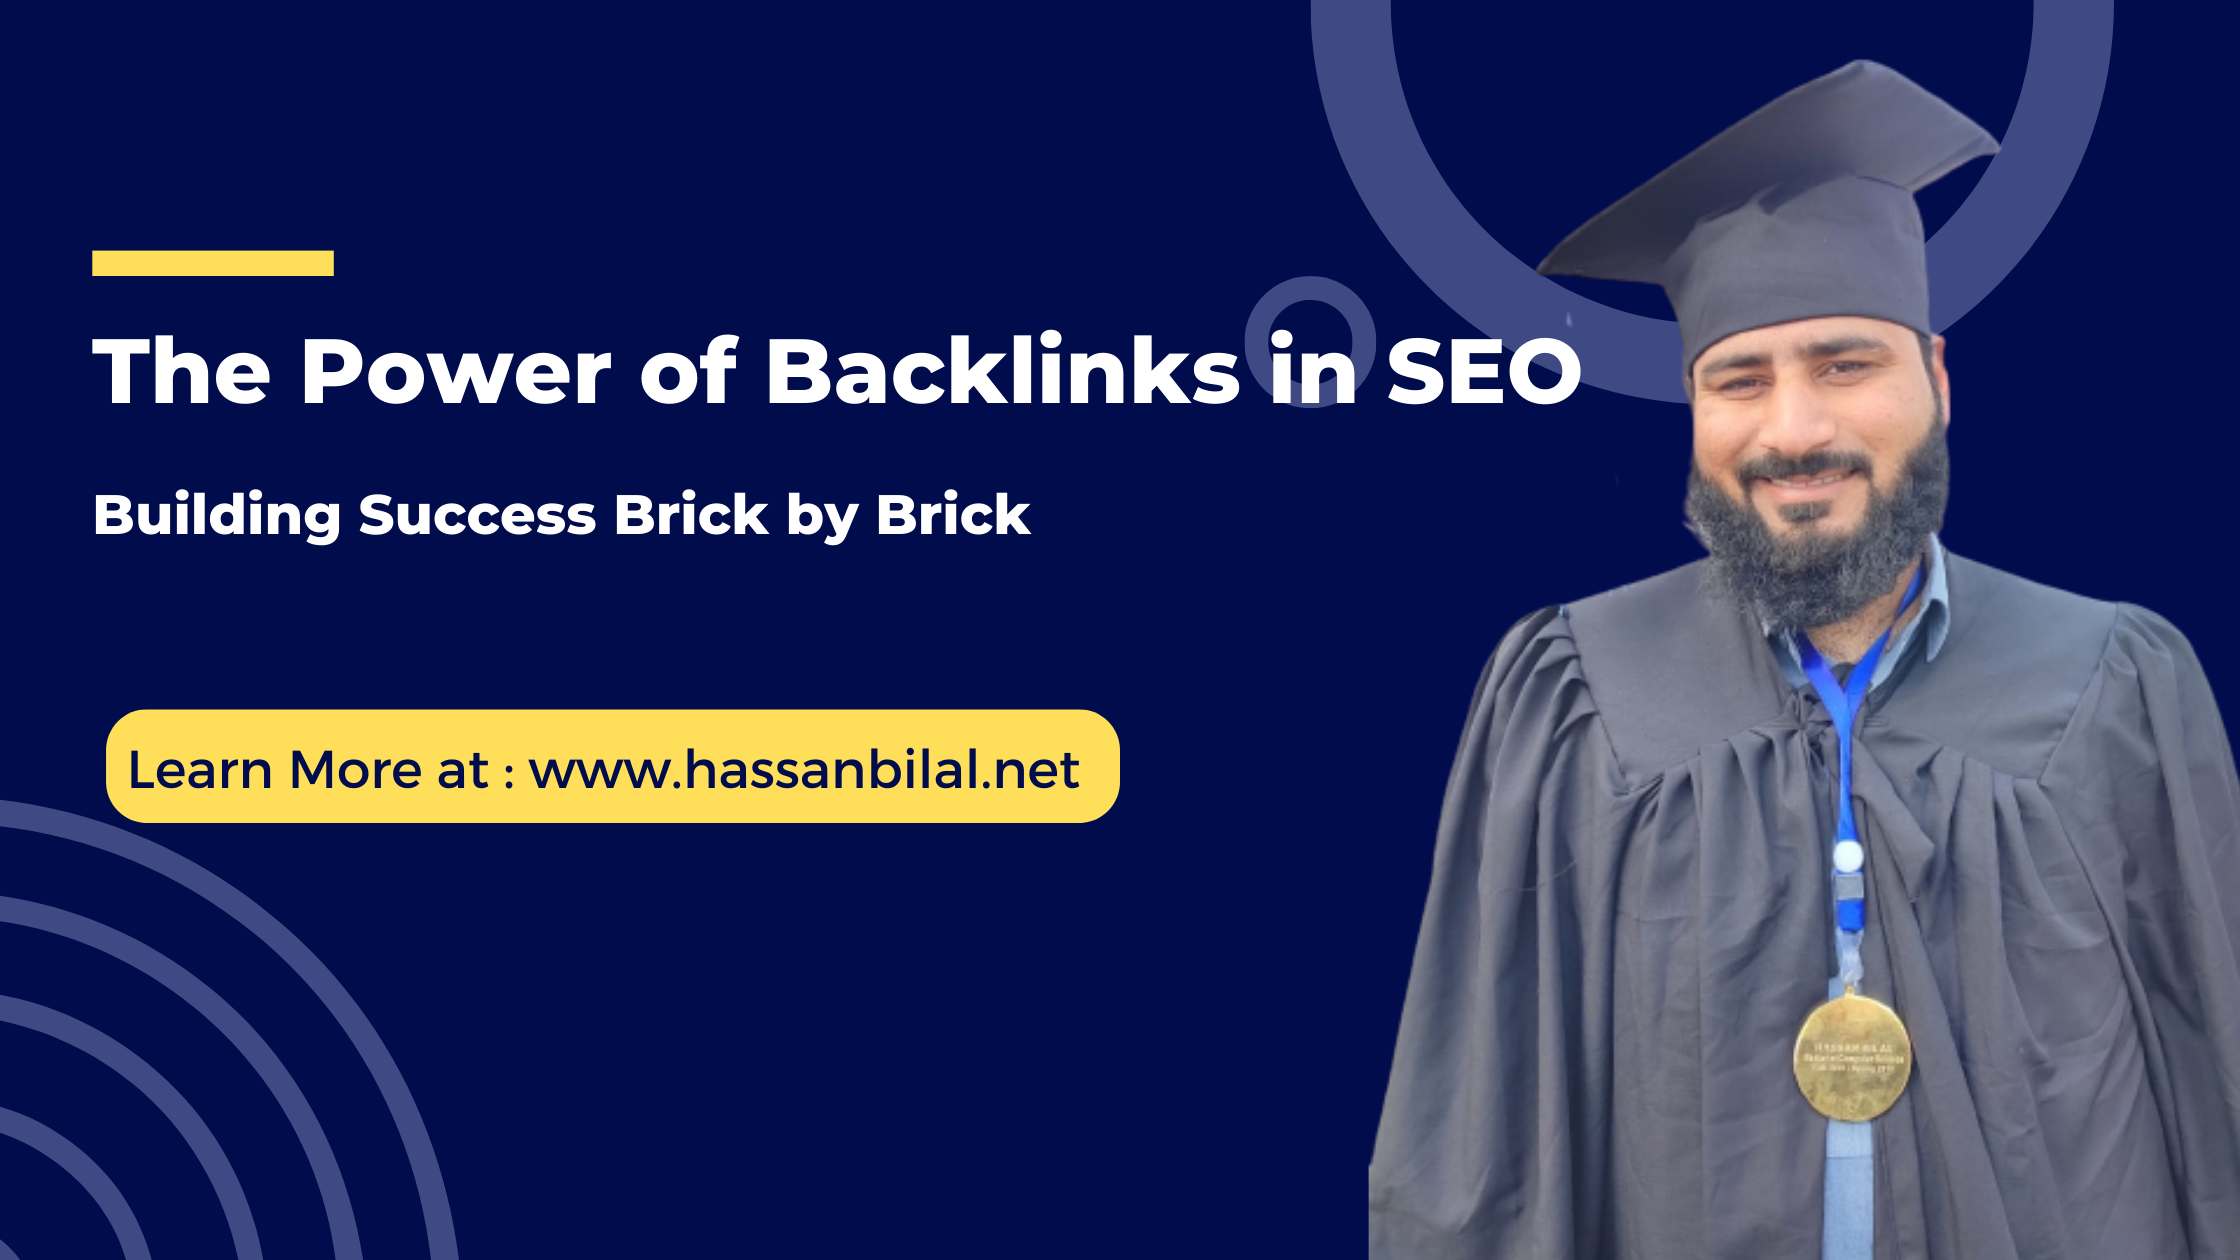 The Power of Backlinks in SEO